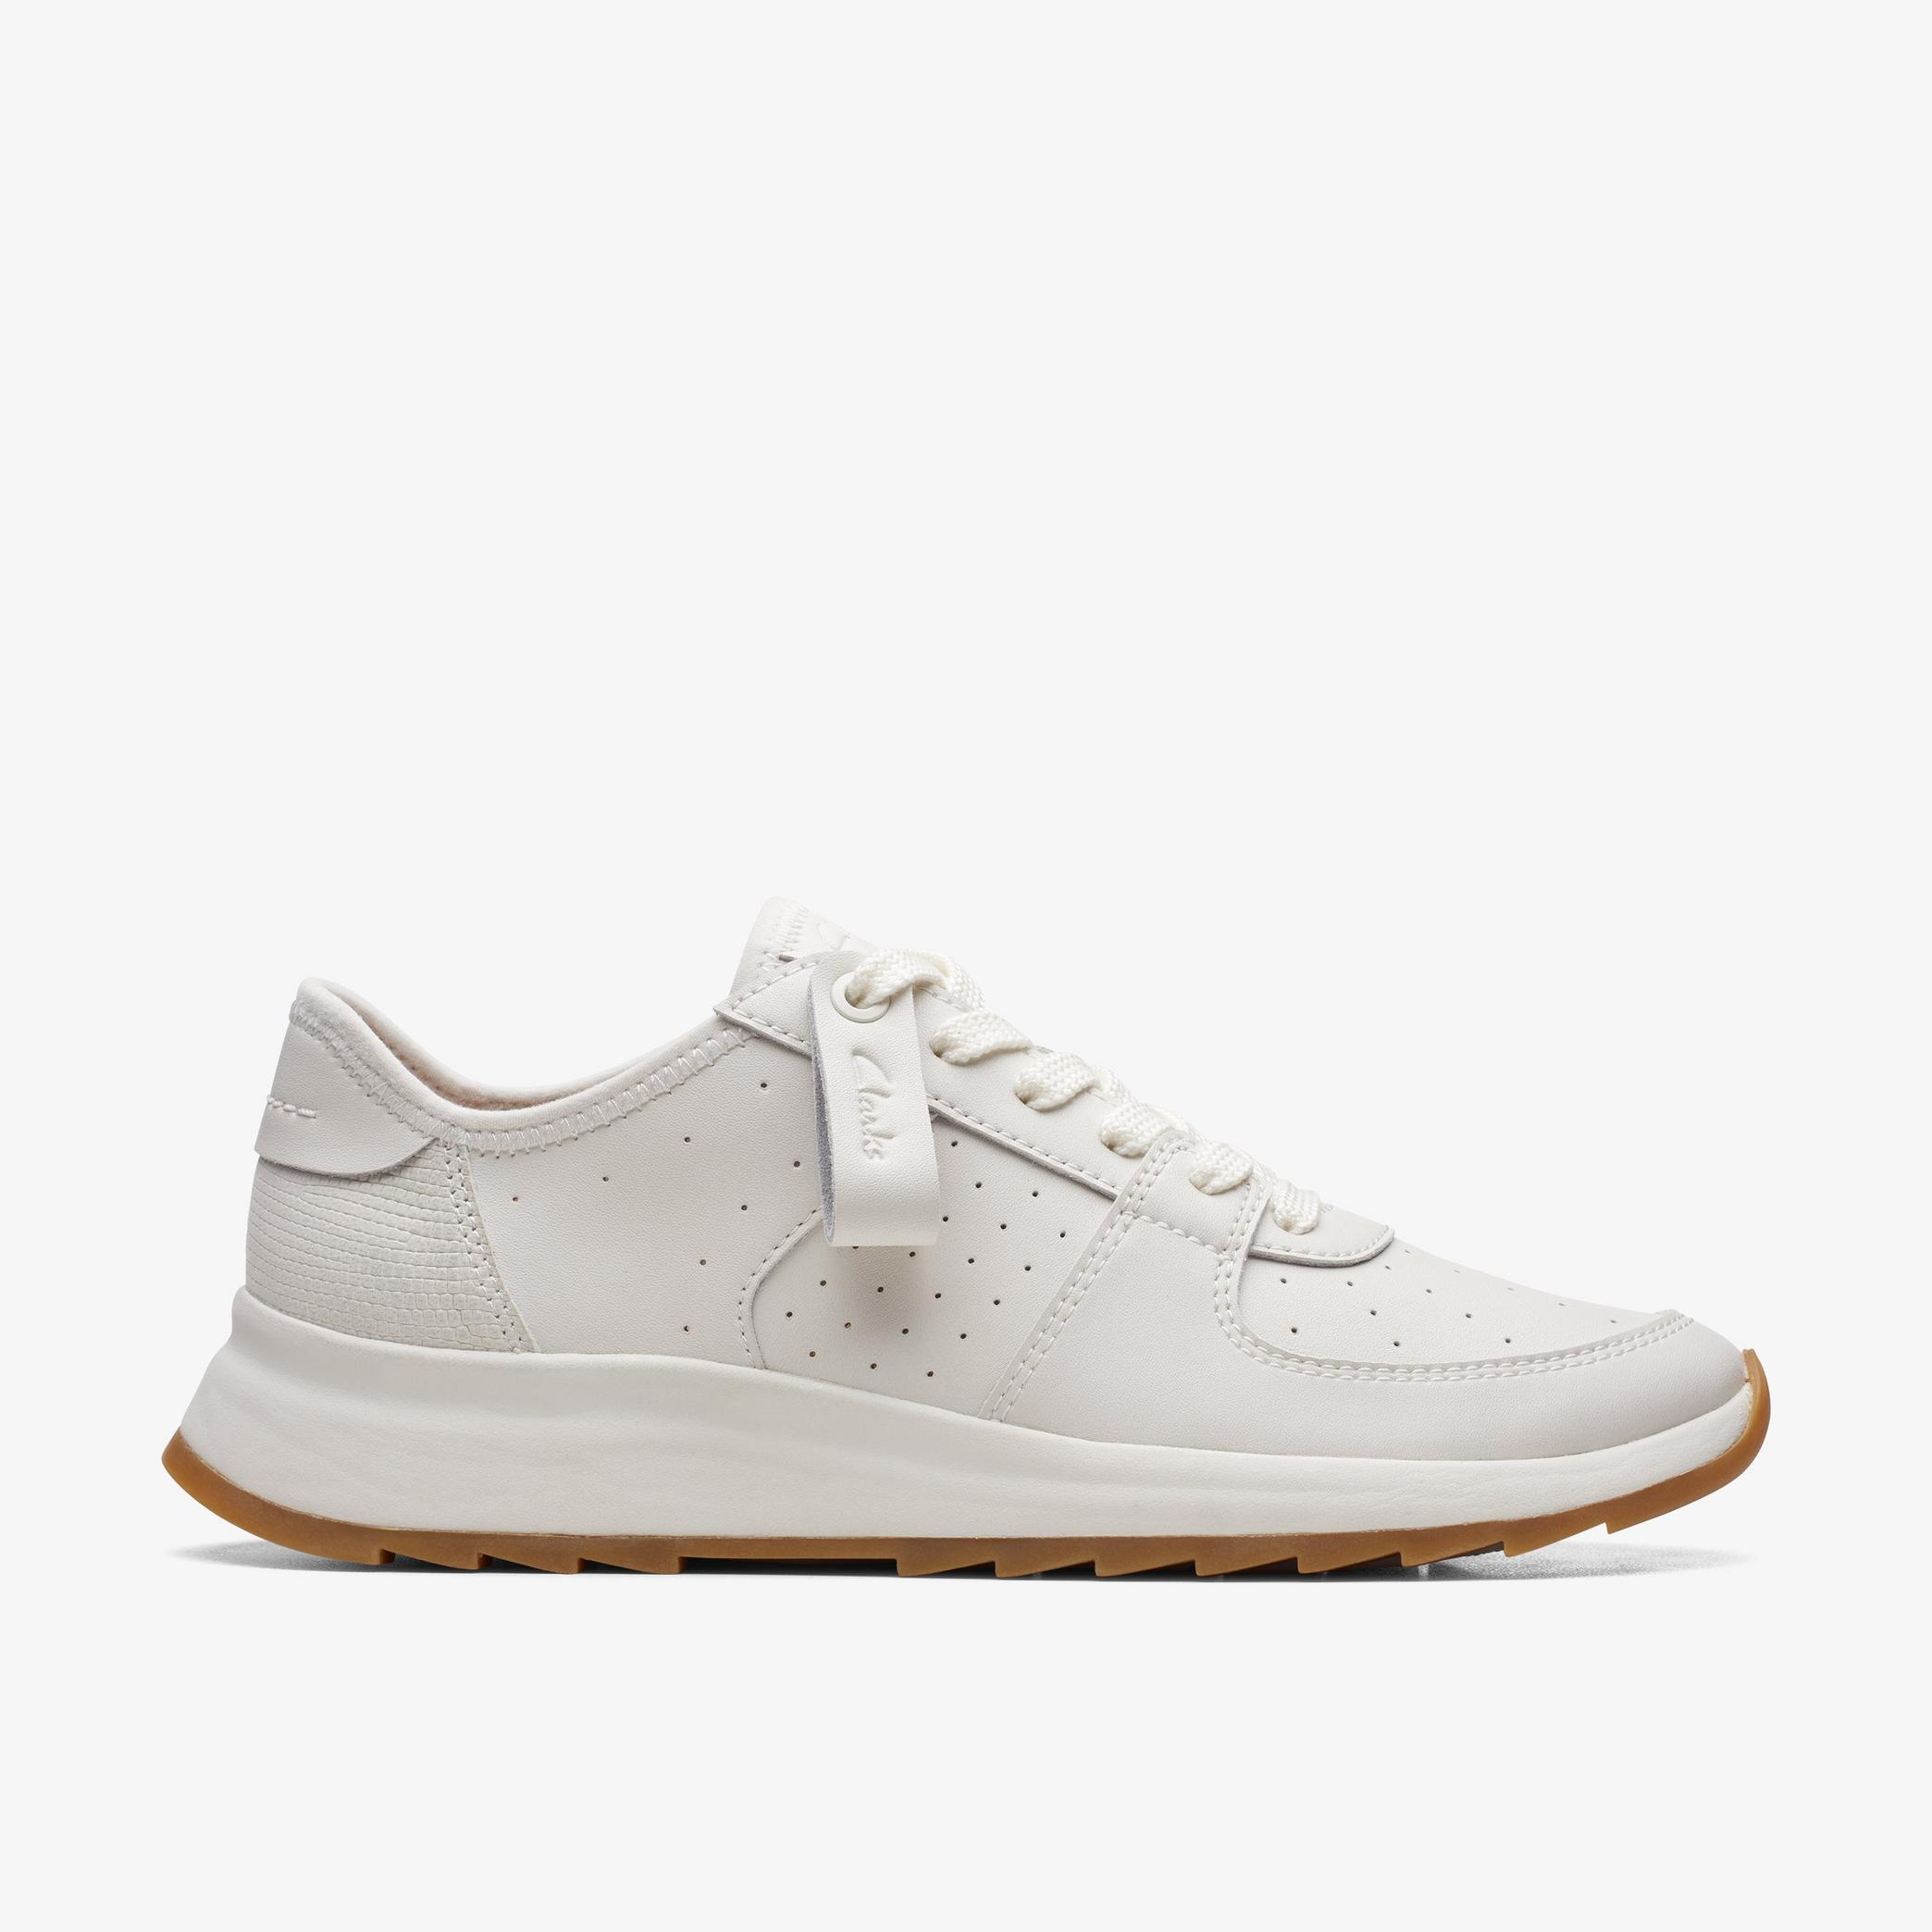 Dash Lite Run Off White Leather Trainers, view 1 of 6